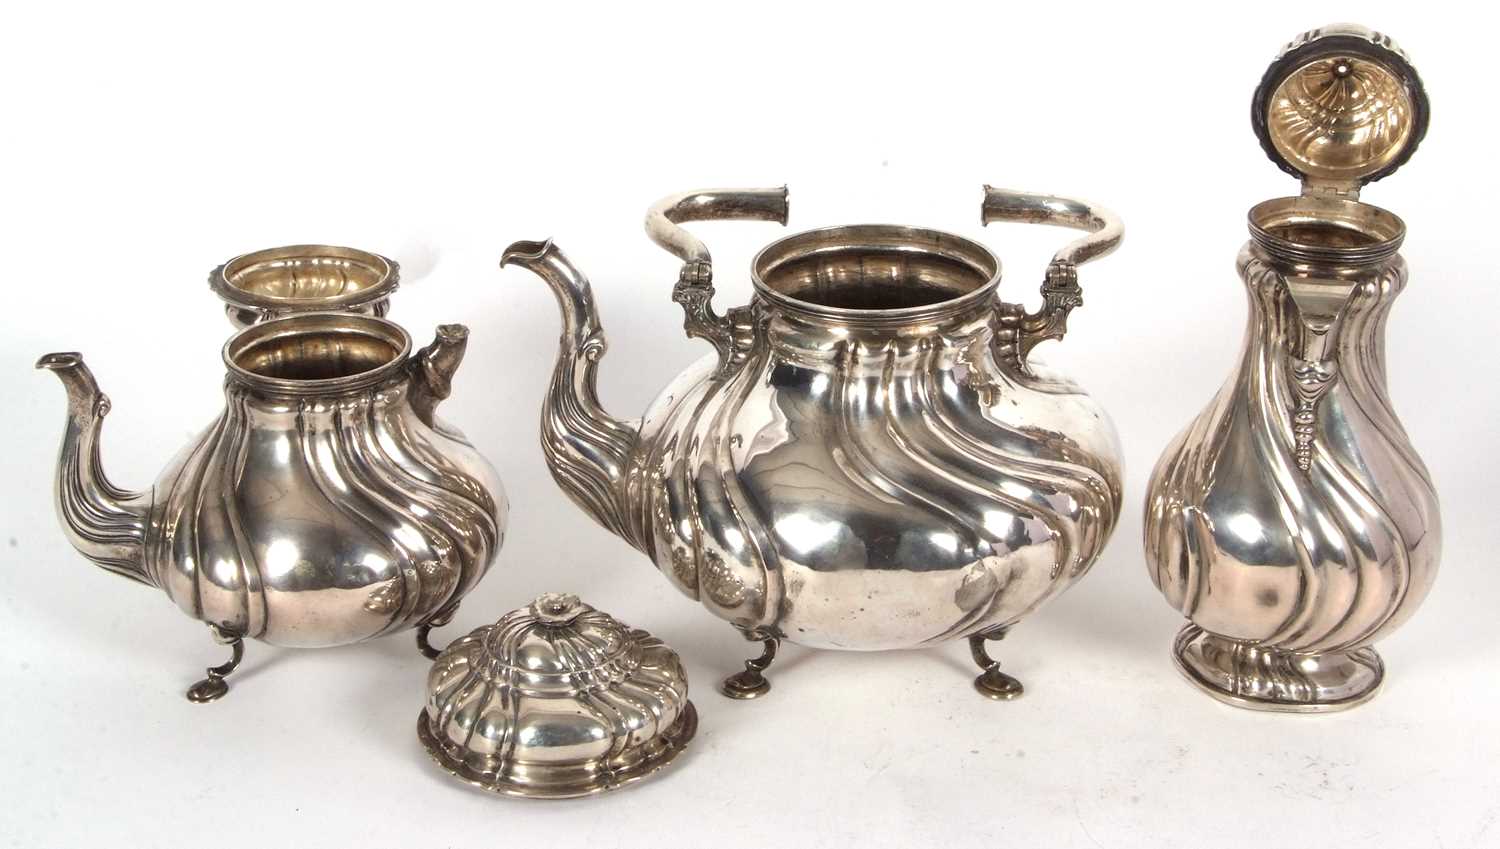 A 19th Century German white metal tea set comprising a large coffee pot, teapot, hot water kettle, - Image 6 of 9